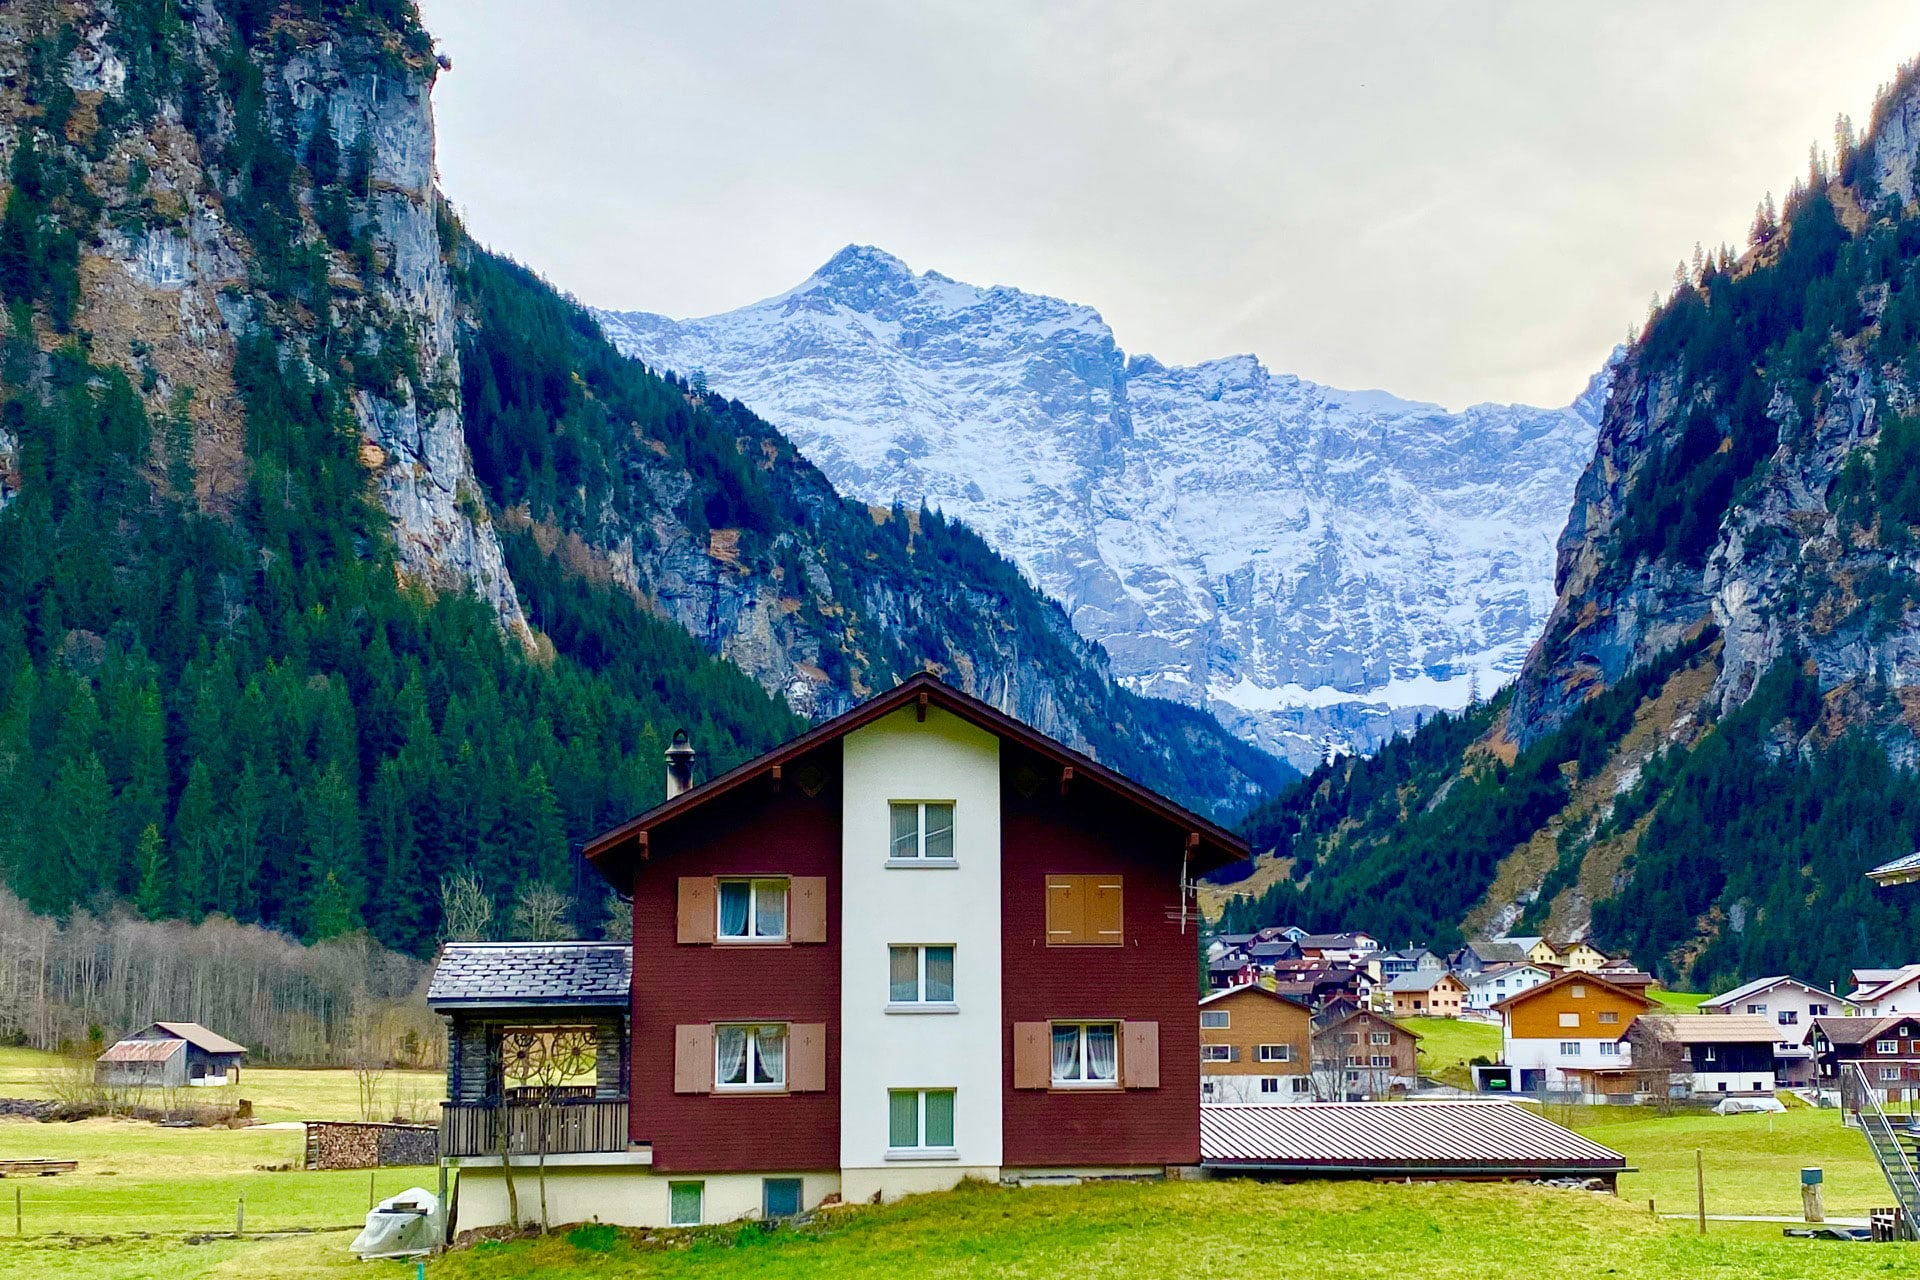 Swiss Alps & Mountain Villages Private Day Tour (from Bern)